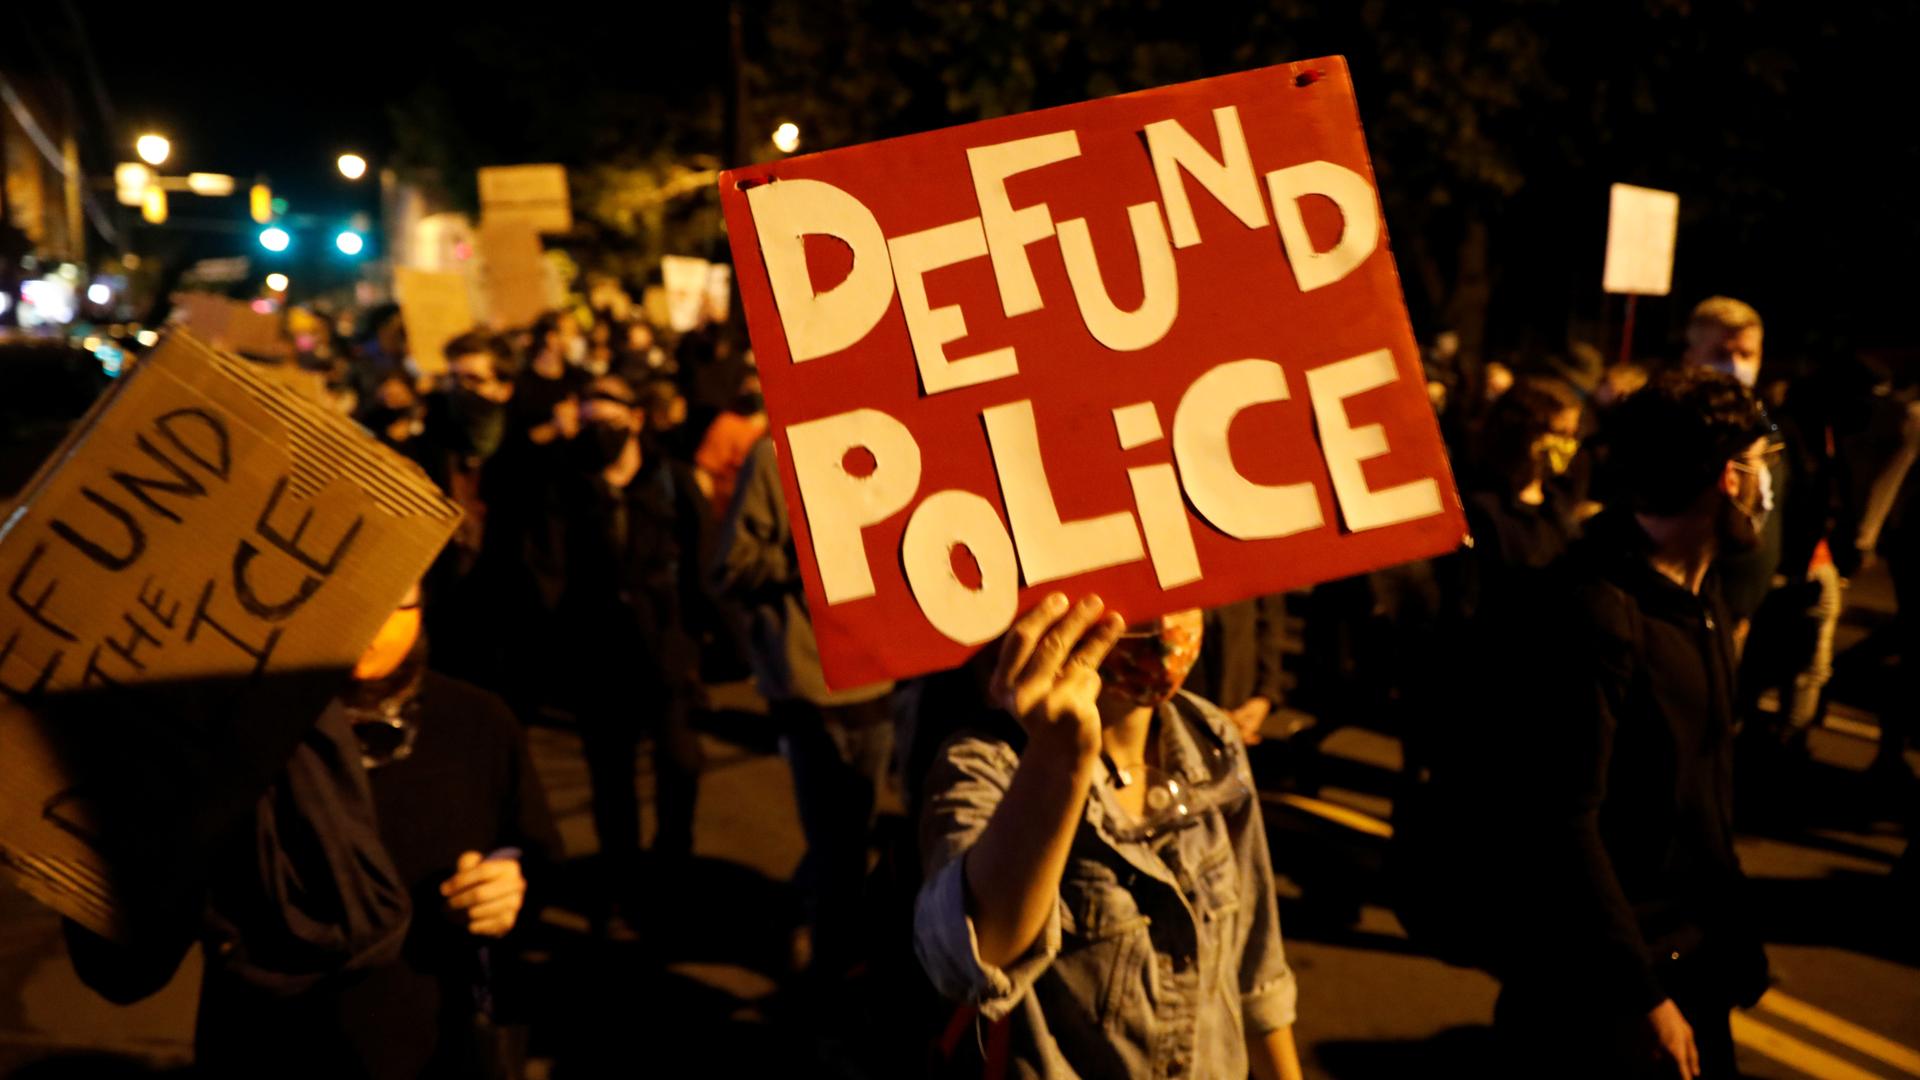 Demonstrators hold a sign reading "Defund the police" during a protest over the death of a Black man, Daniel Prude, after police put a spit hood over his head during an arrest on March 23, in Rochester, New York, September 6, 2020.